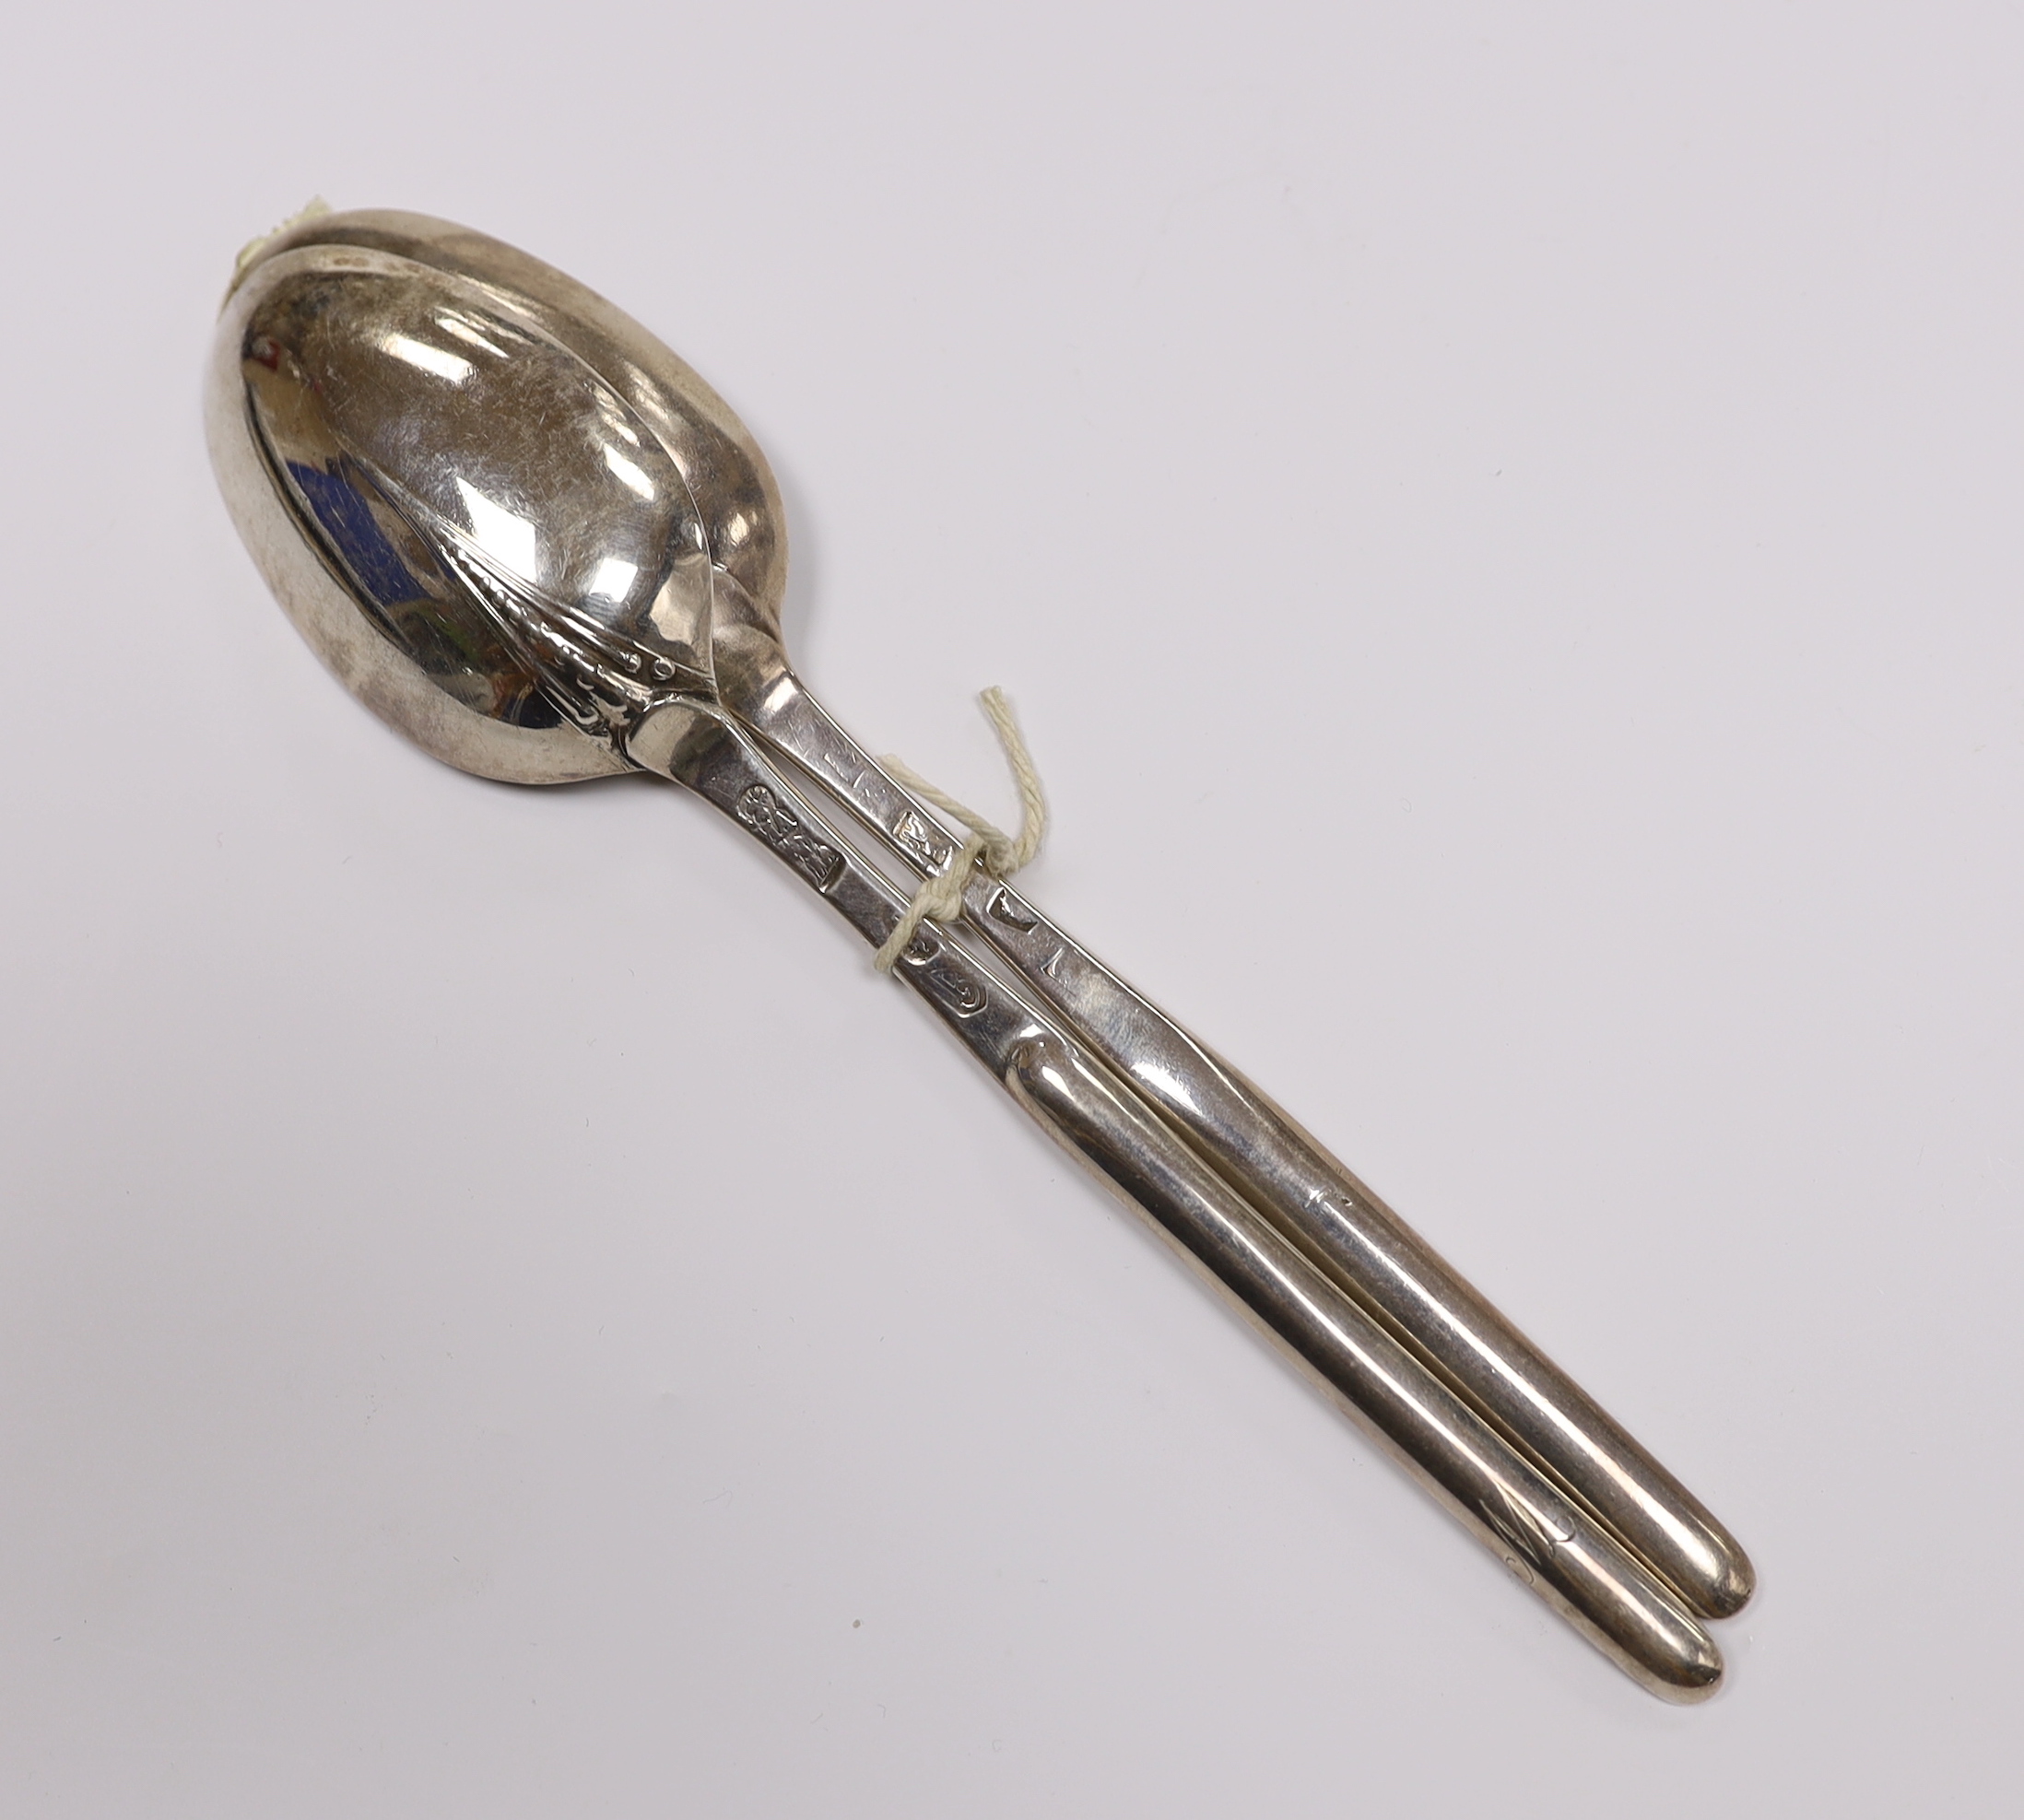 Two 18th century silver combinations marrow scoop spoons, William Matthew I, London, 1703, with rat tail back and later with rubbed marks.